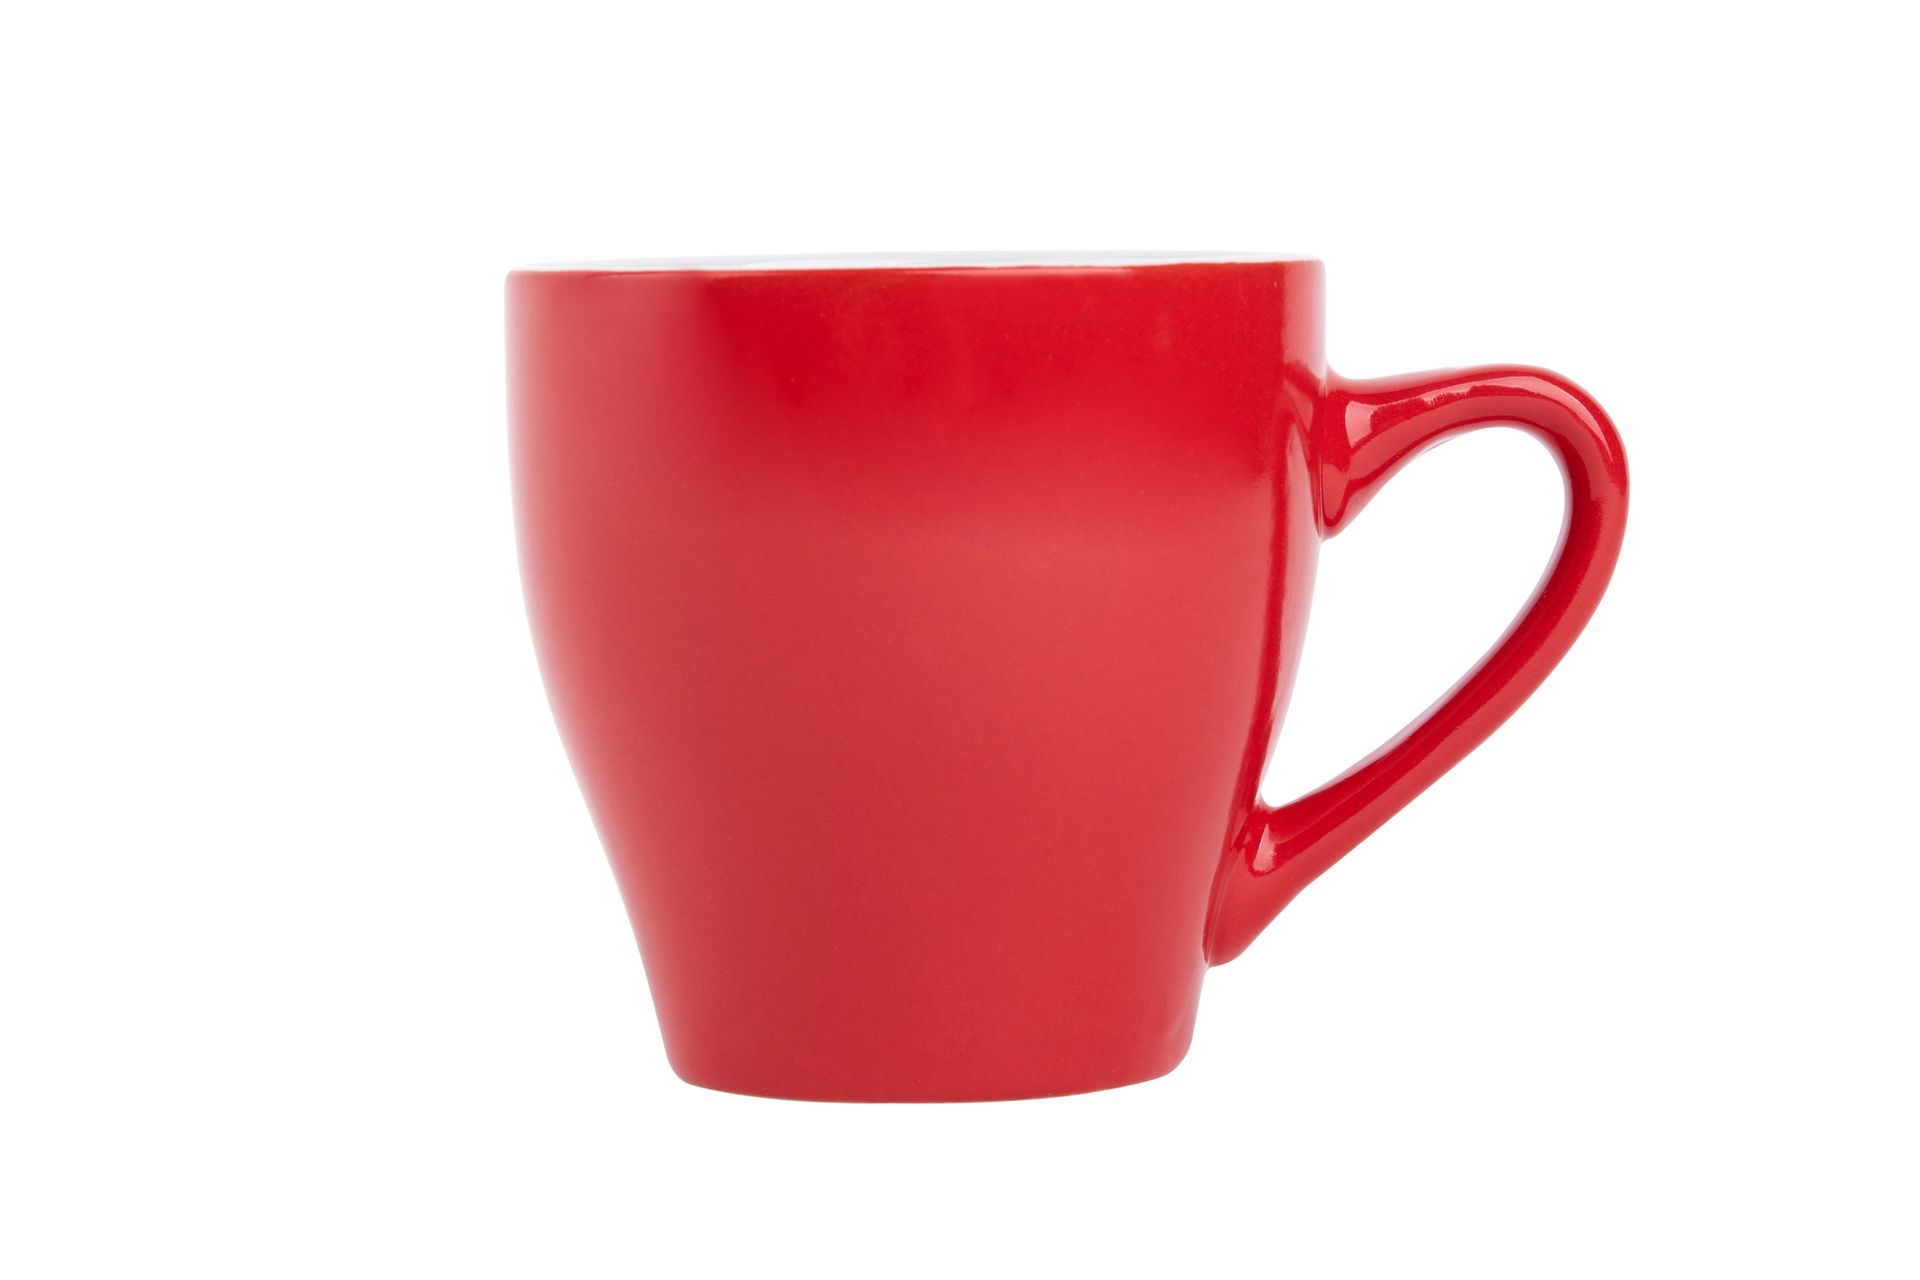 A red mug with a heart shaped handle on a white background